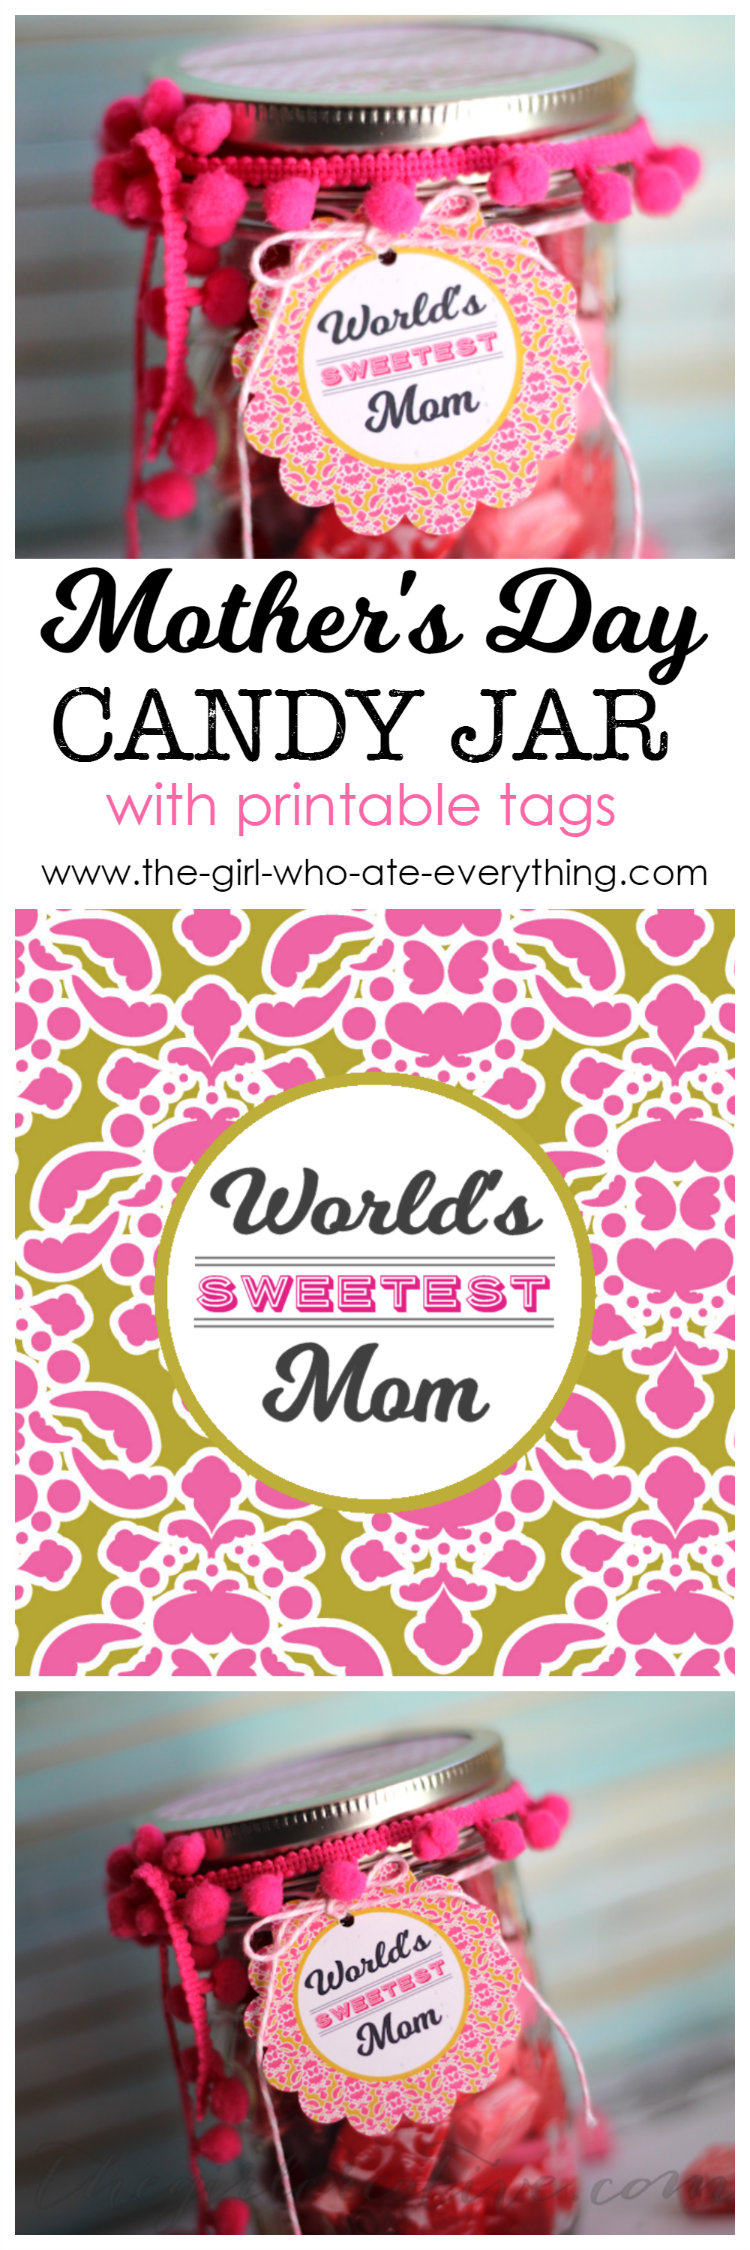 Mother's Day Candy Jar with printable tags